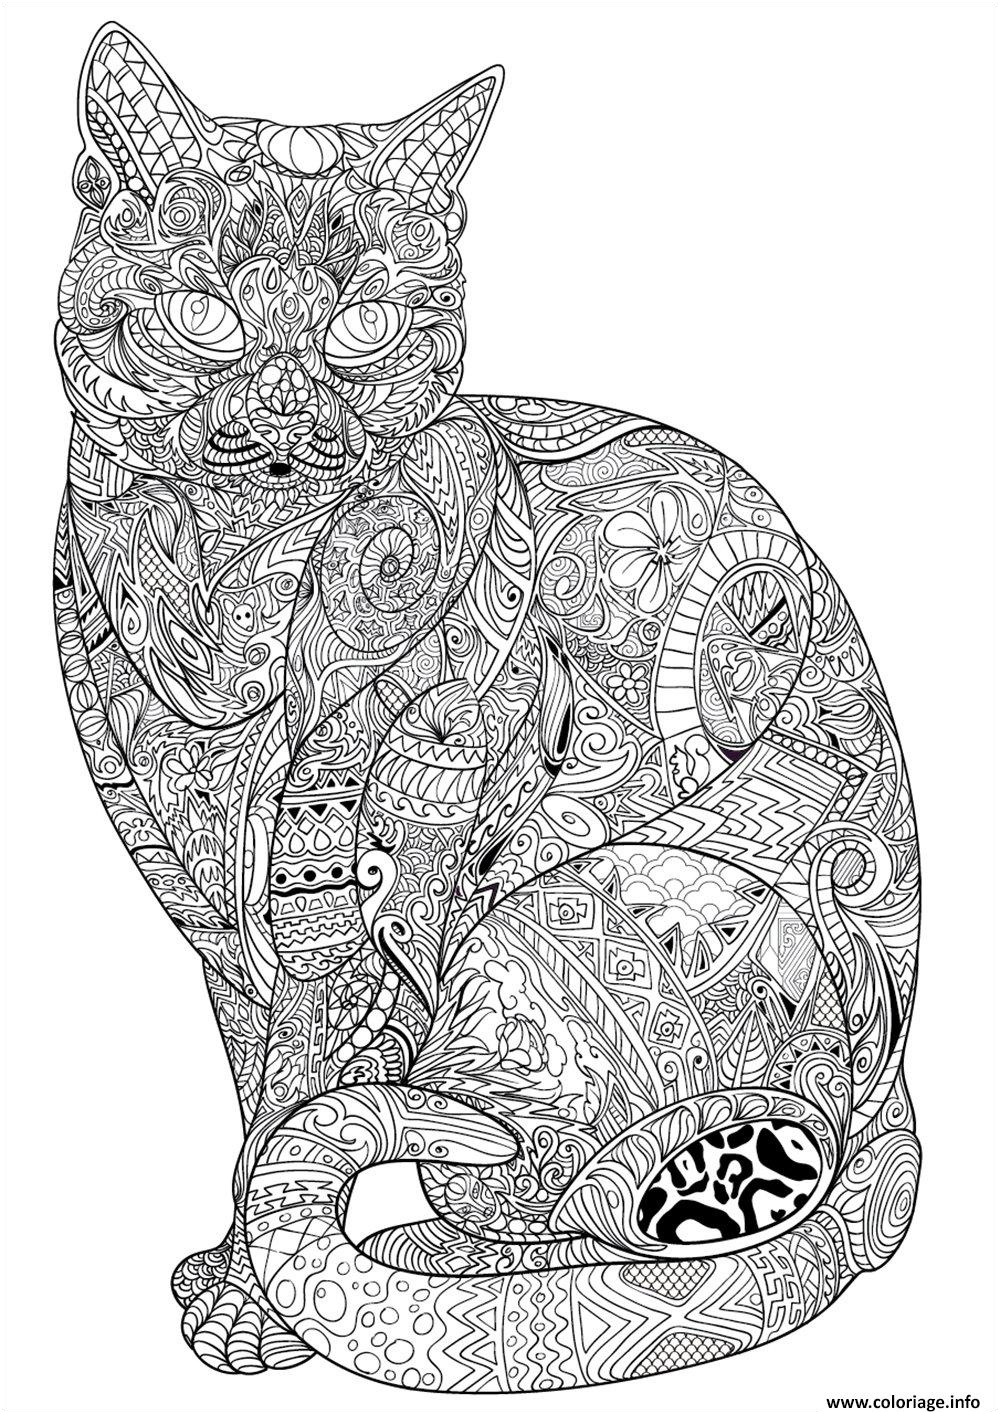 Coloriage Anti Stress Animaux Cerf Inspiration Coloriage Chat Adulte Difficile Antistress Animaux